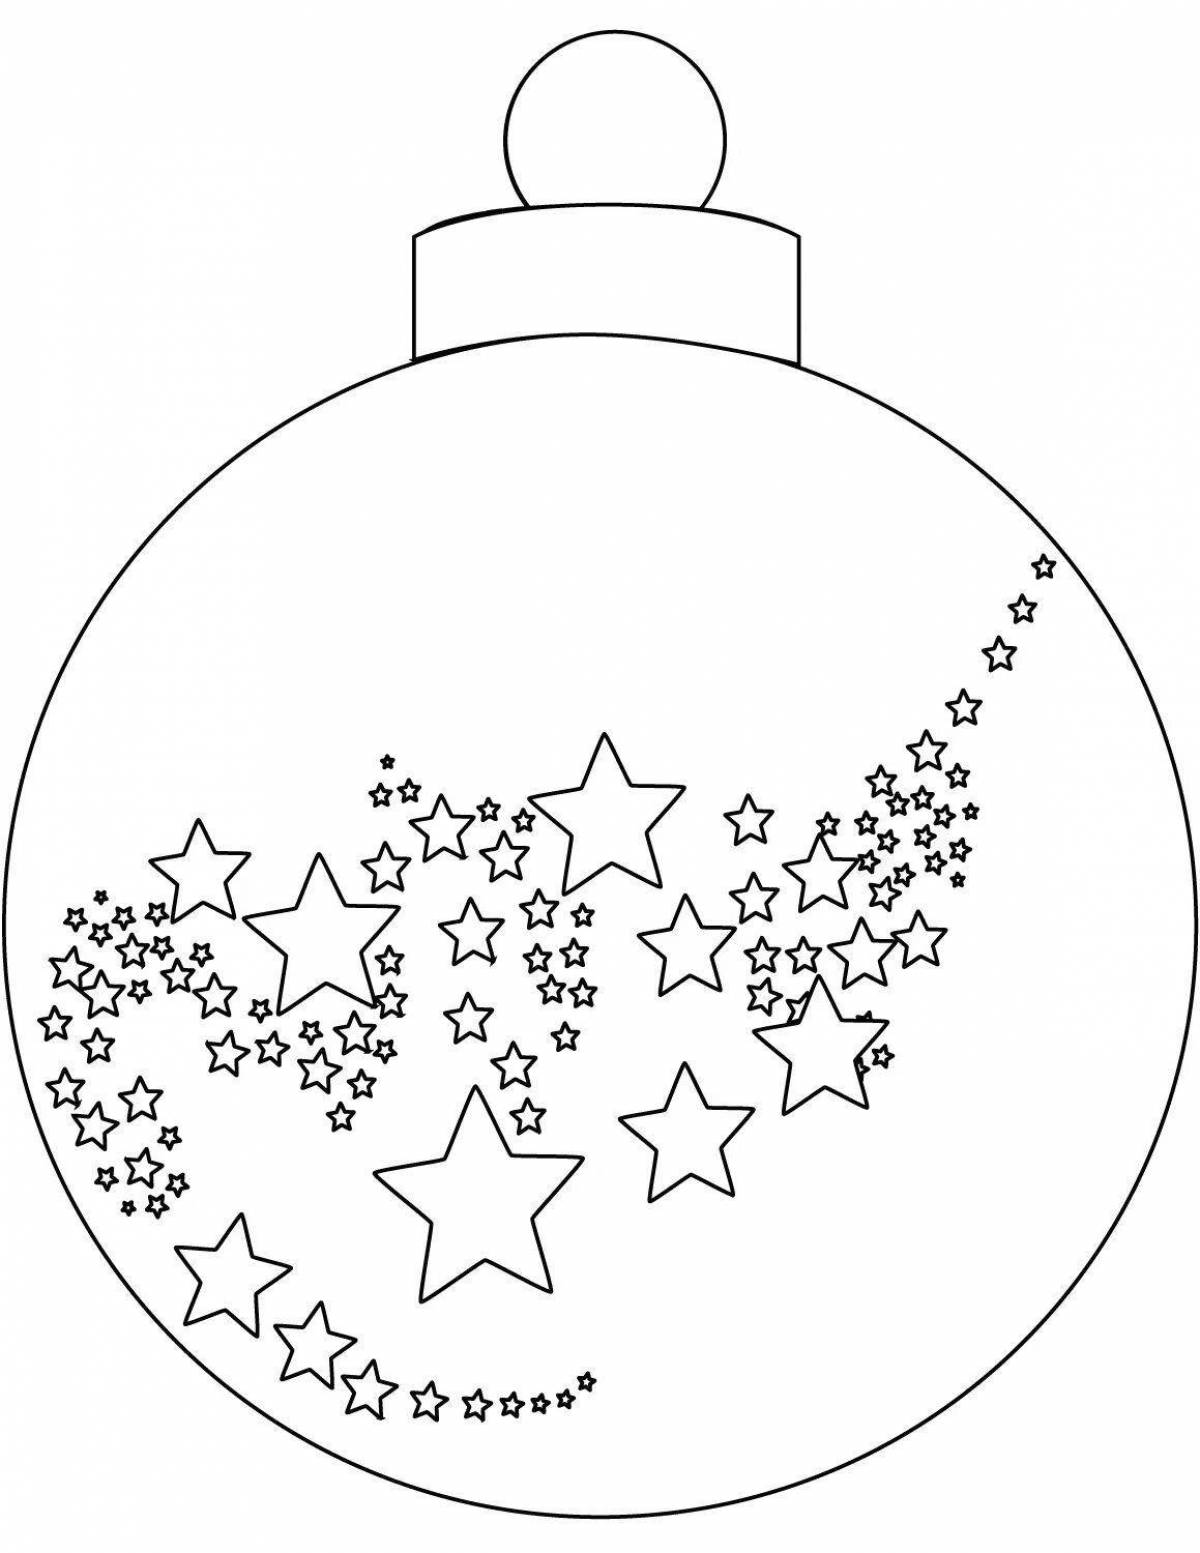 Bright Christmas balls coloring for kids